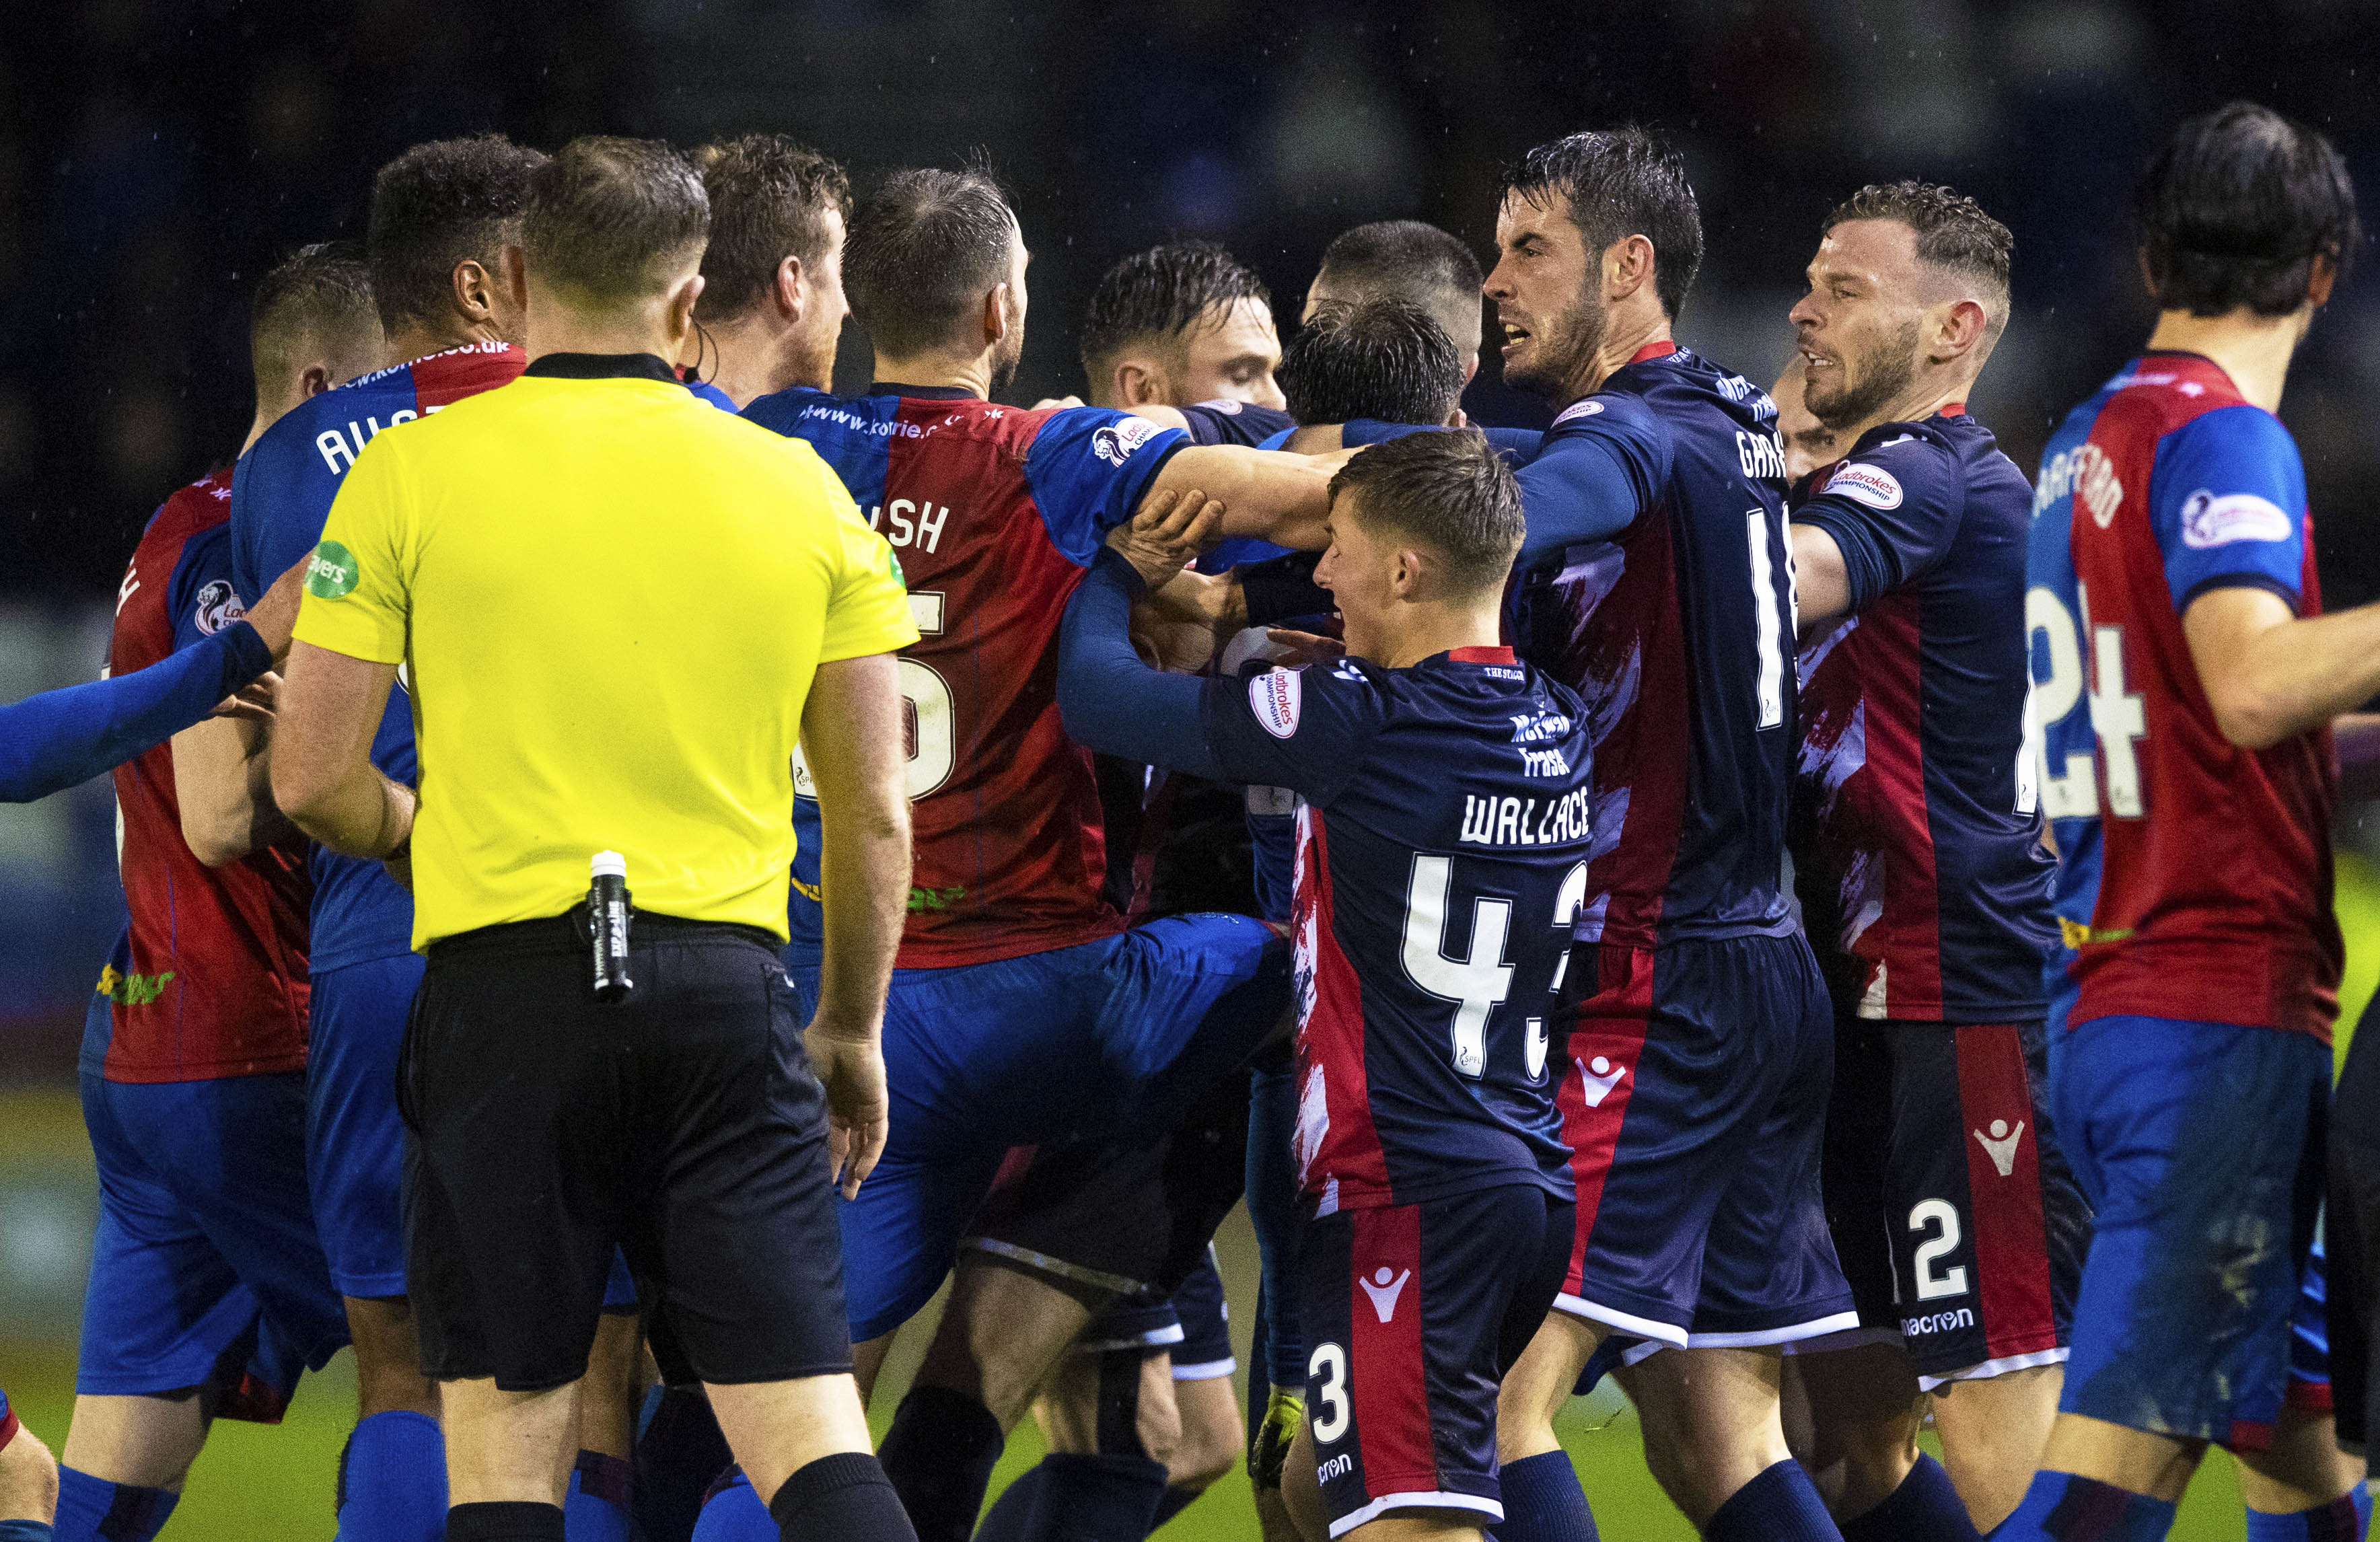 The skirmish between Caley Thistle and Ross County players after Michael Gardyne and Brad McKay clashed.